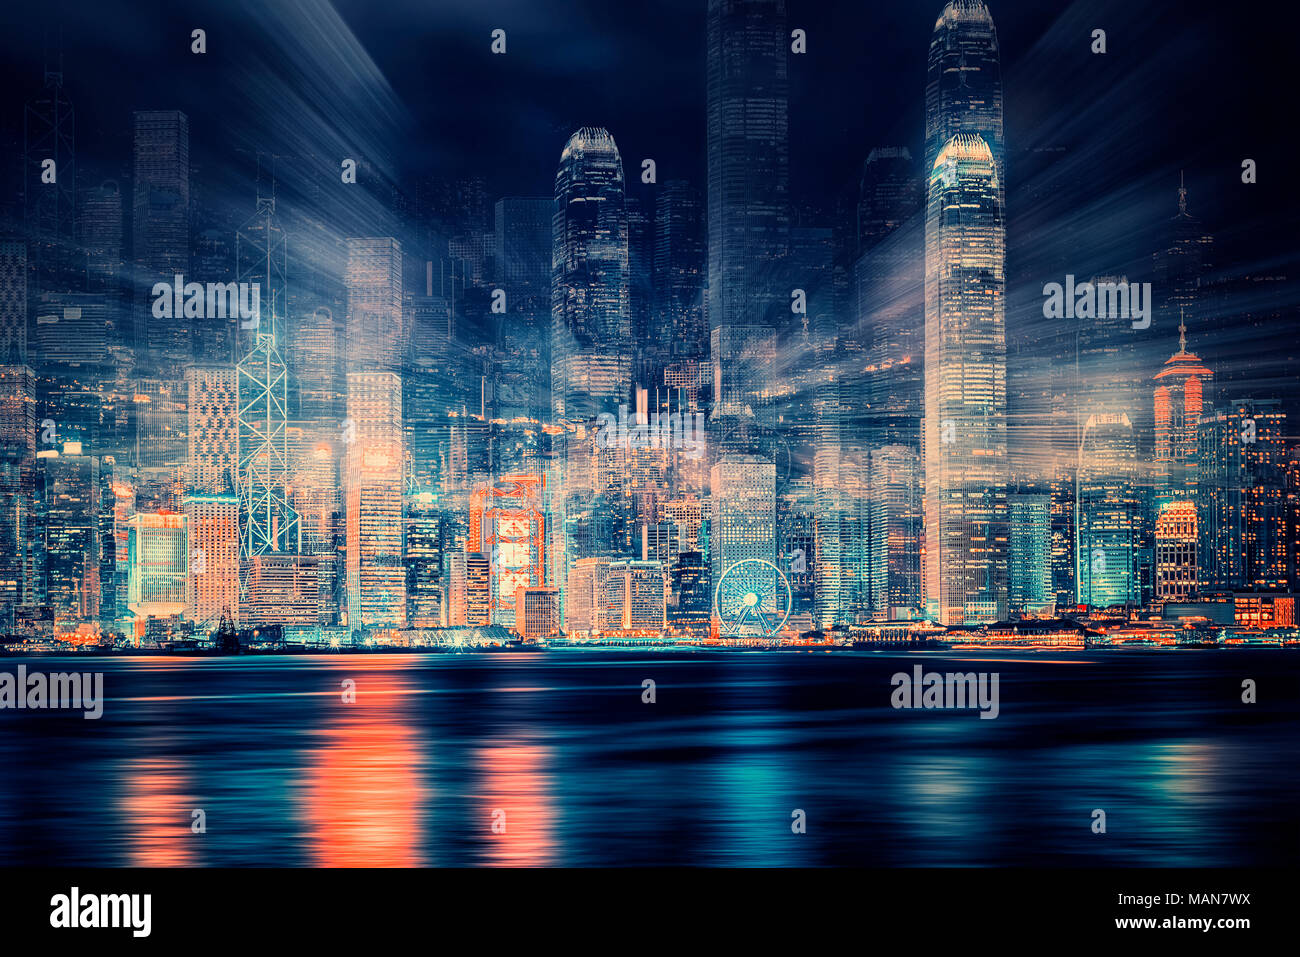 Concept design of the Hong Kong city by night Stock Photo